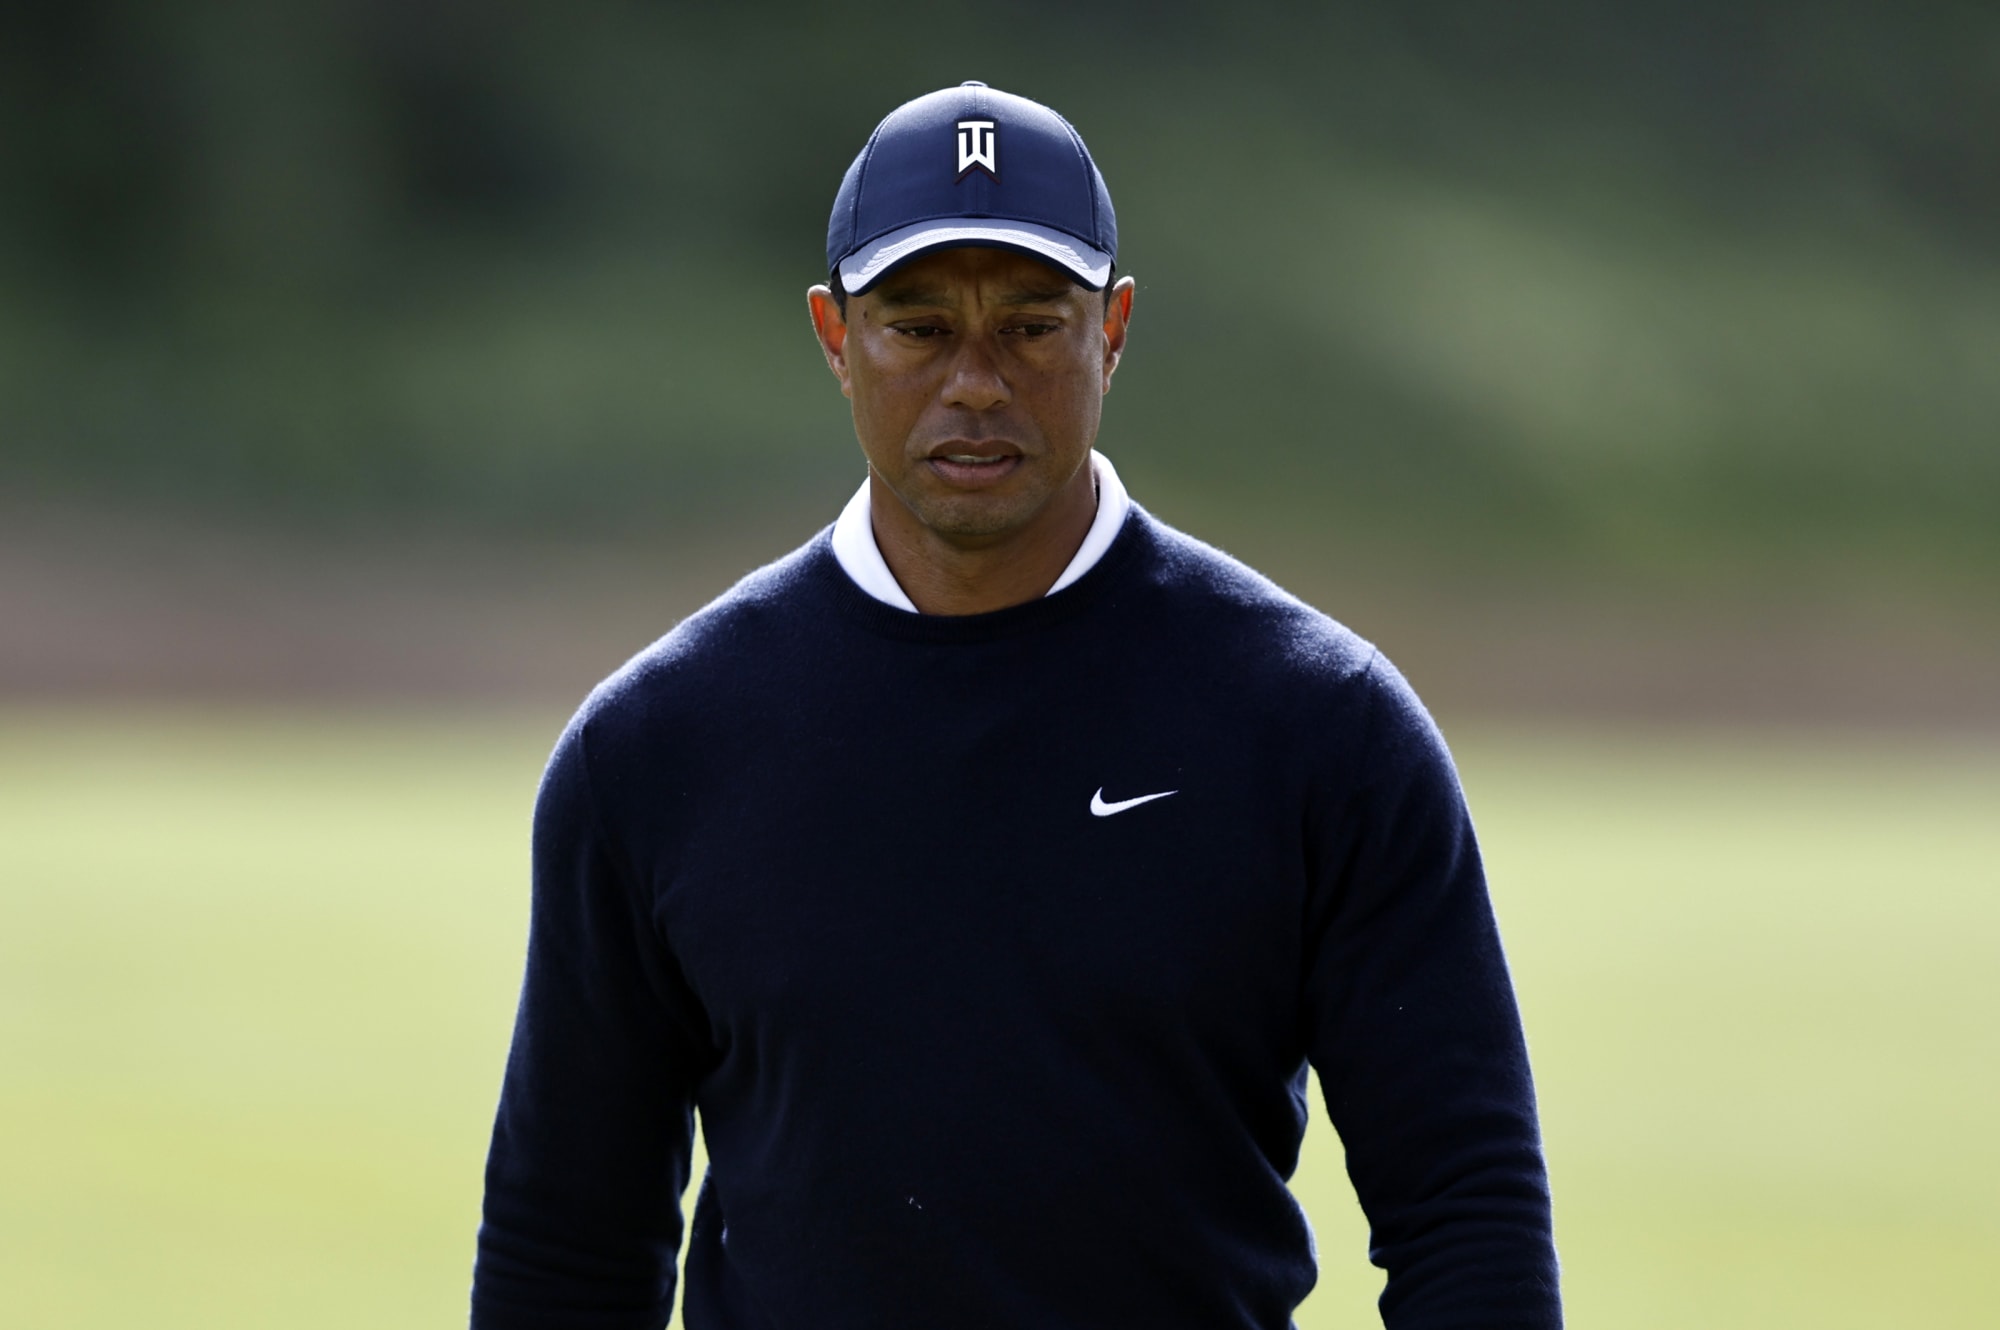 Genesis Invitational Projecting Friday's Cutline; Does Tiger Make It?